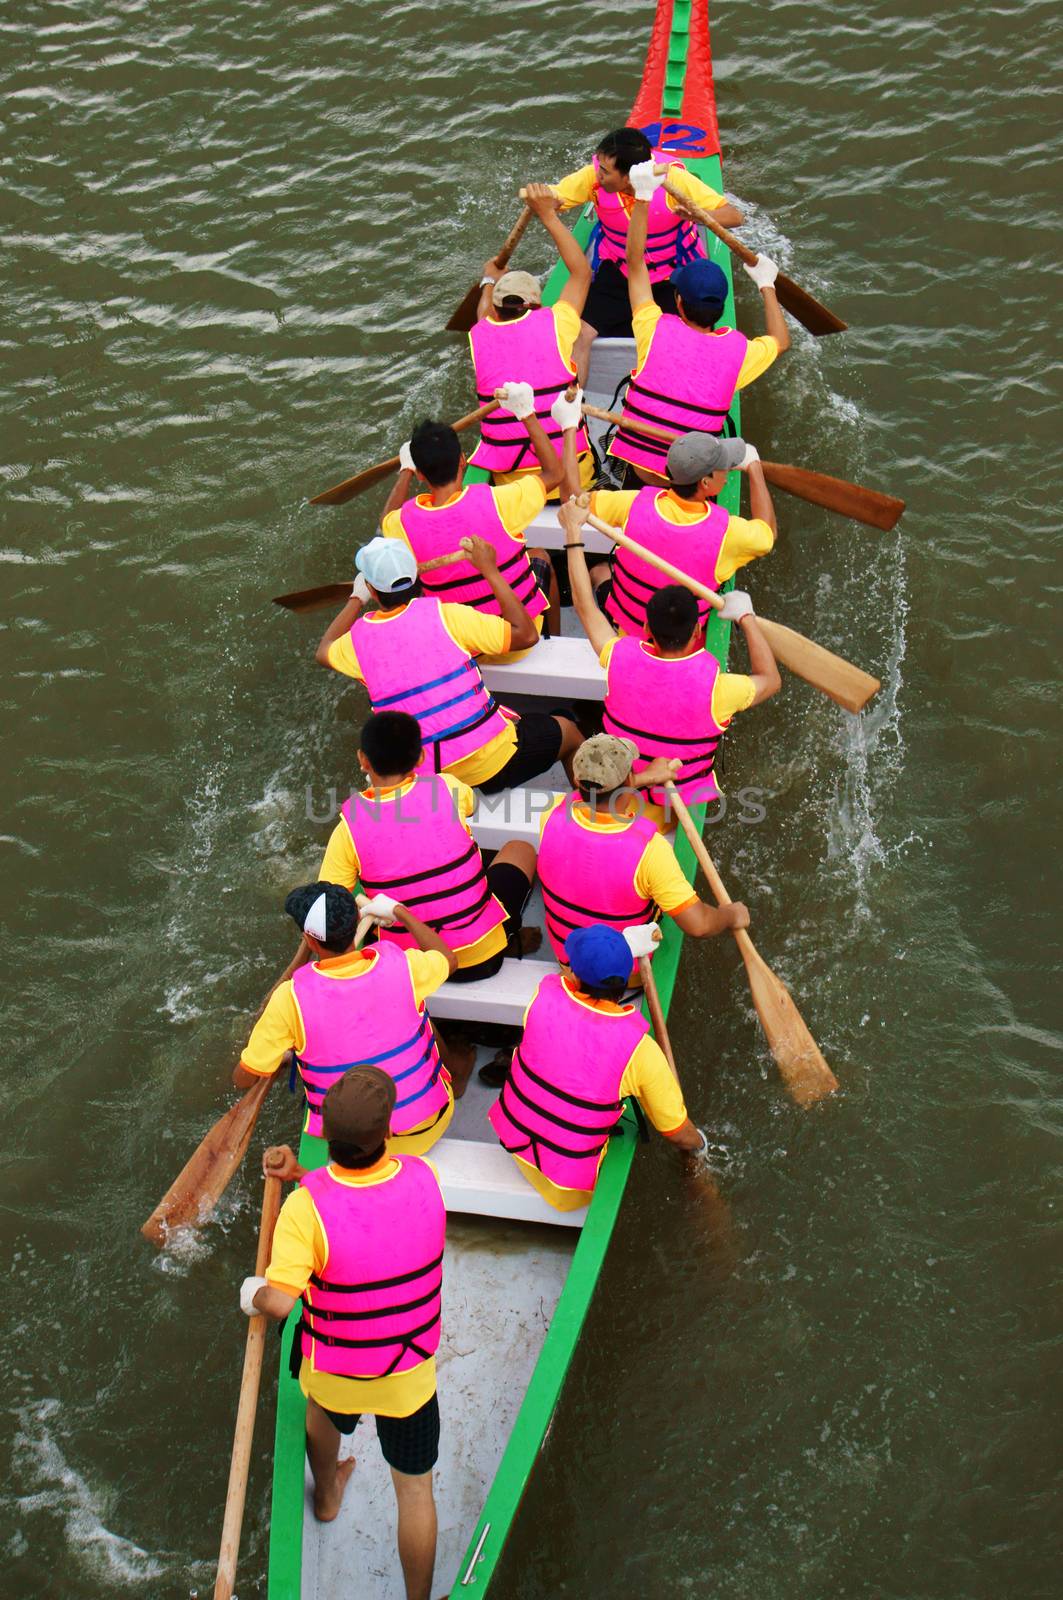 SAI GON, VIET NAM- APRIL 27: Racer in competition at dragon boat race, Sai Gon, Viet Nam, April 27, 2013